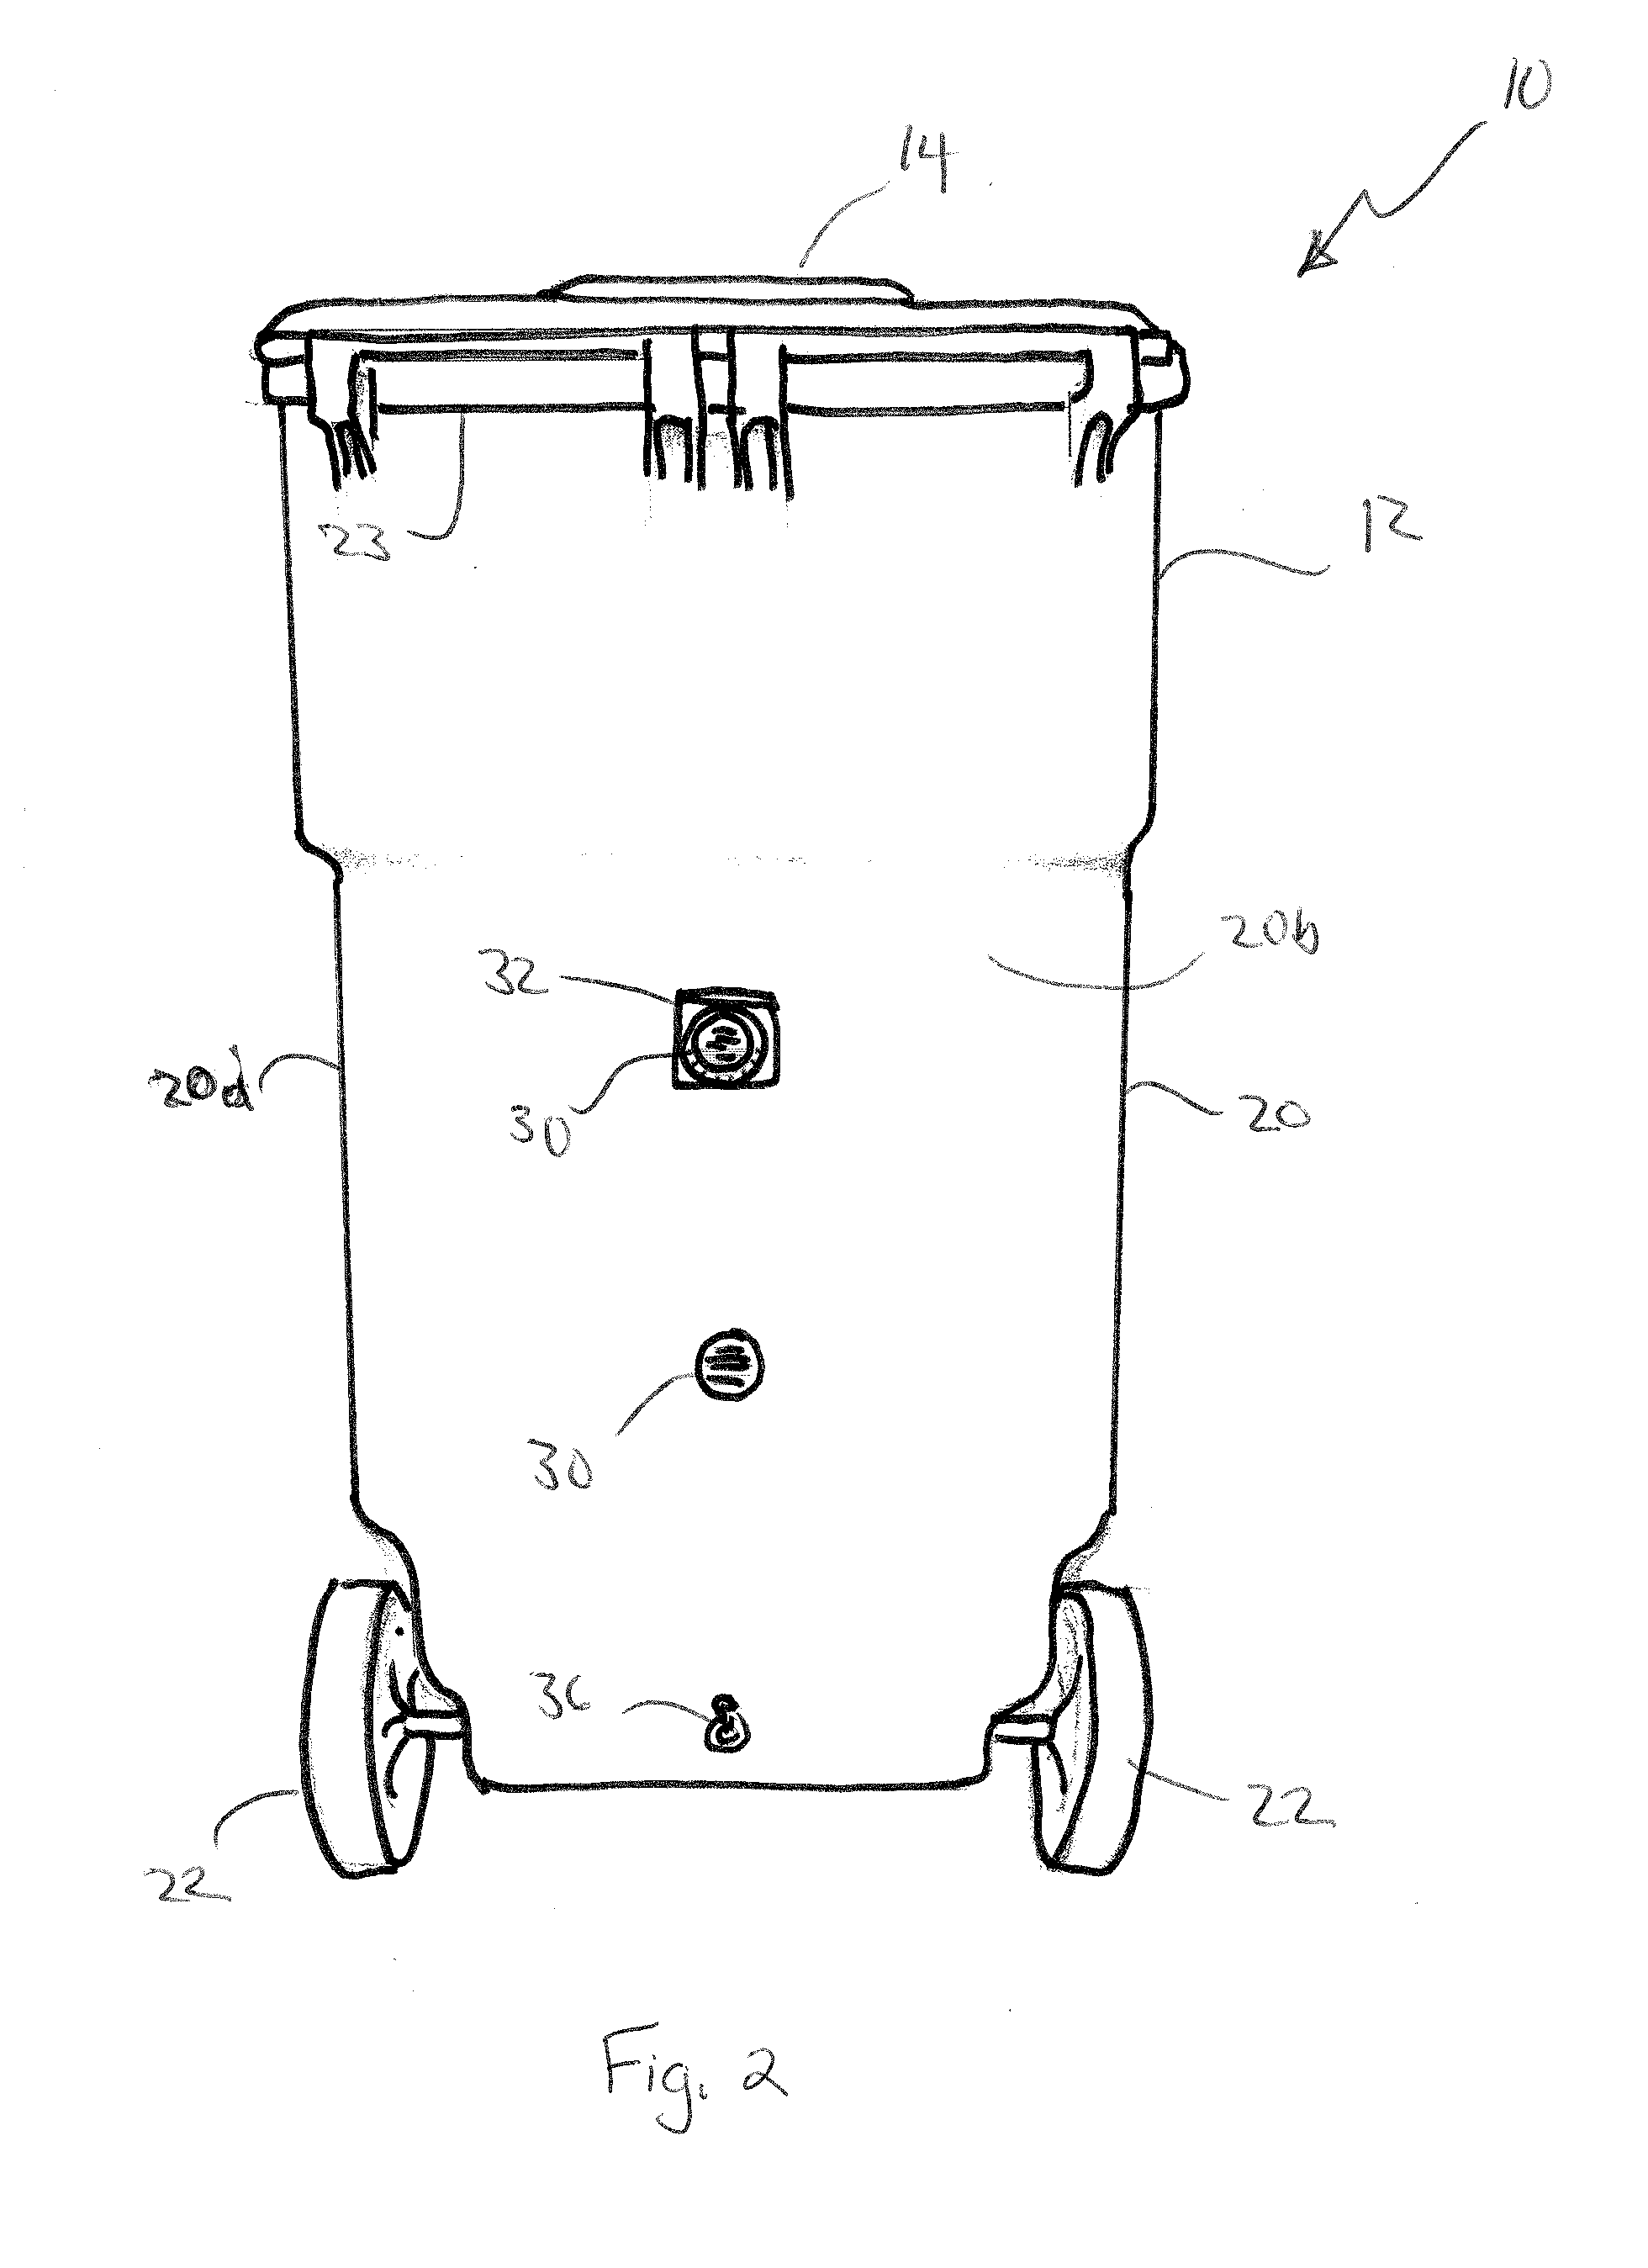 Aerated composter and waste collection bin